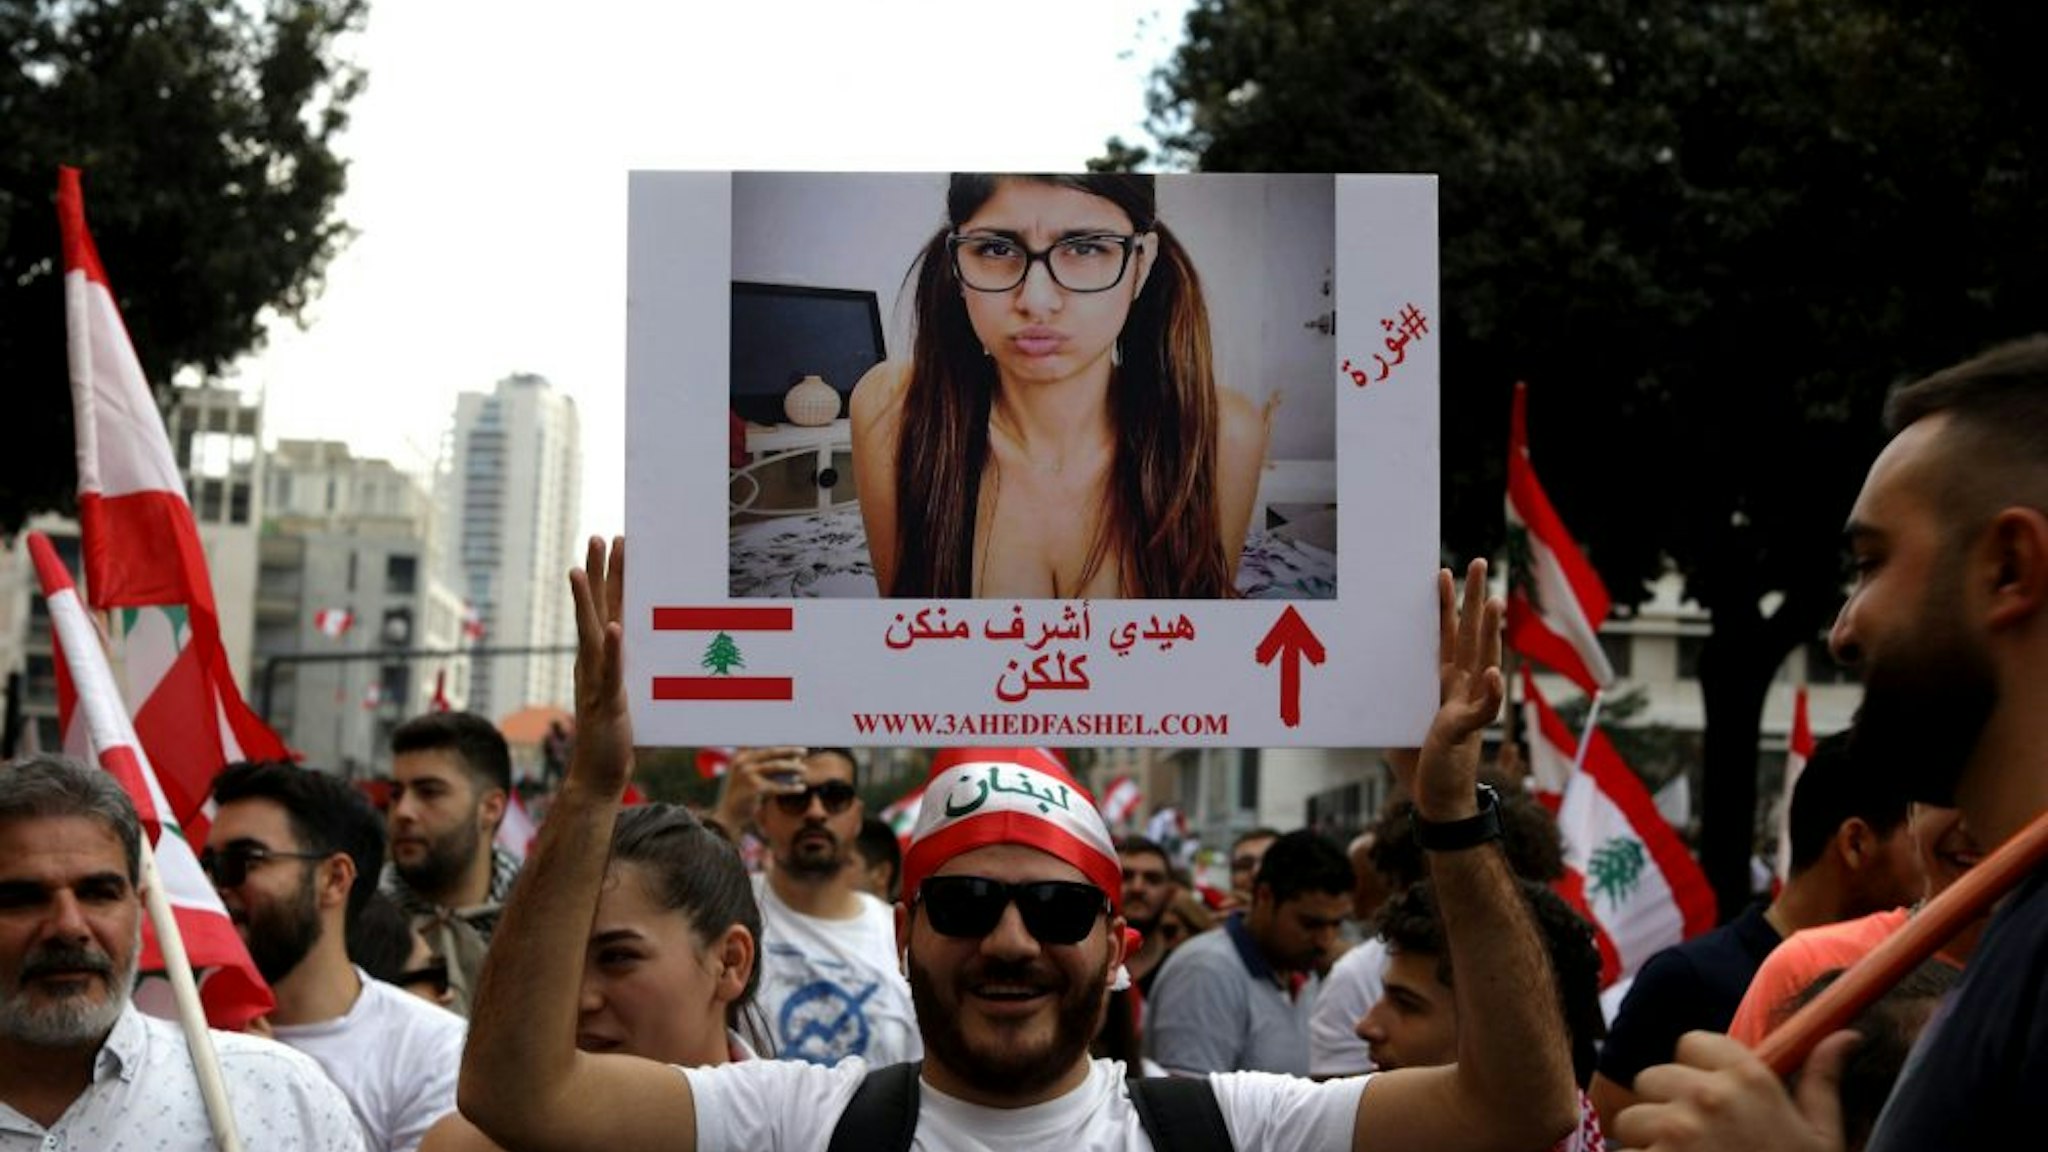 A Lebanese man holds a picture of Lebanese porn actress Mia Khalifa as he takes part in a rally in downtown Beirut on October 20, 2019, on the fourth day of demonstrations against tax increases and official corruption. The writing on the placard reads in Arabic " She is more honourable than all of you". - Thousands continued to rally despite calls for calm from politicians and dozens of arrests. The demonstrators are demanding a sweeping overhaul of Lebanon's political system, citing grievances ranging from austerity measures to poor infrastructure.